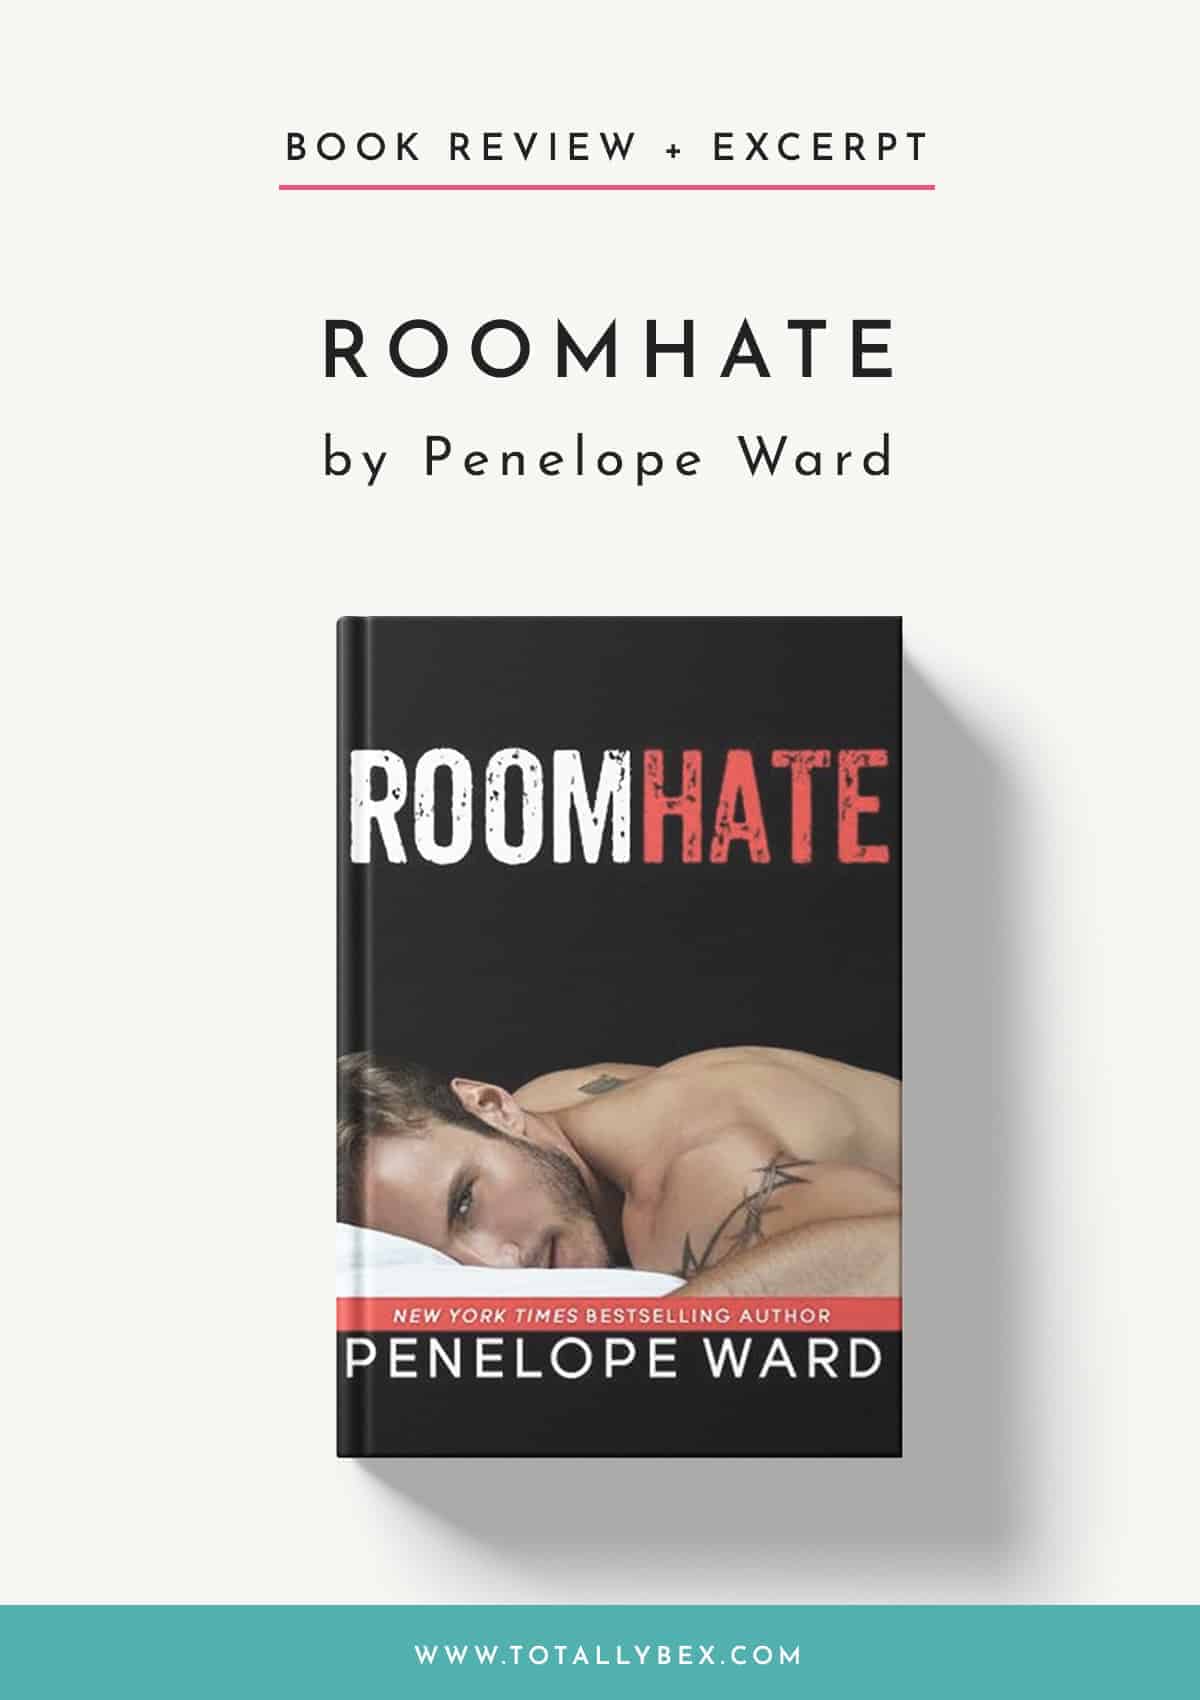 Roomhate by Penelope Ward-Book Review + Excerpt